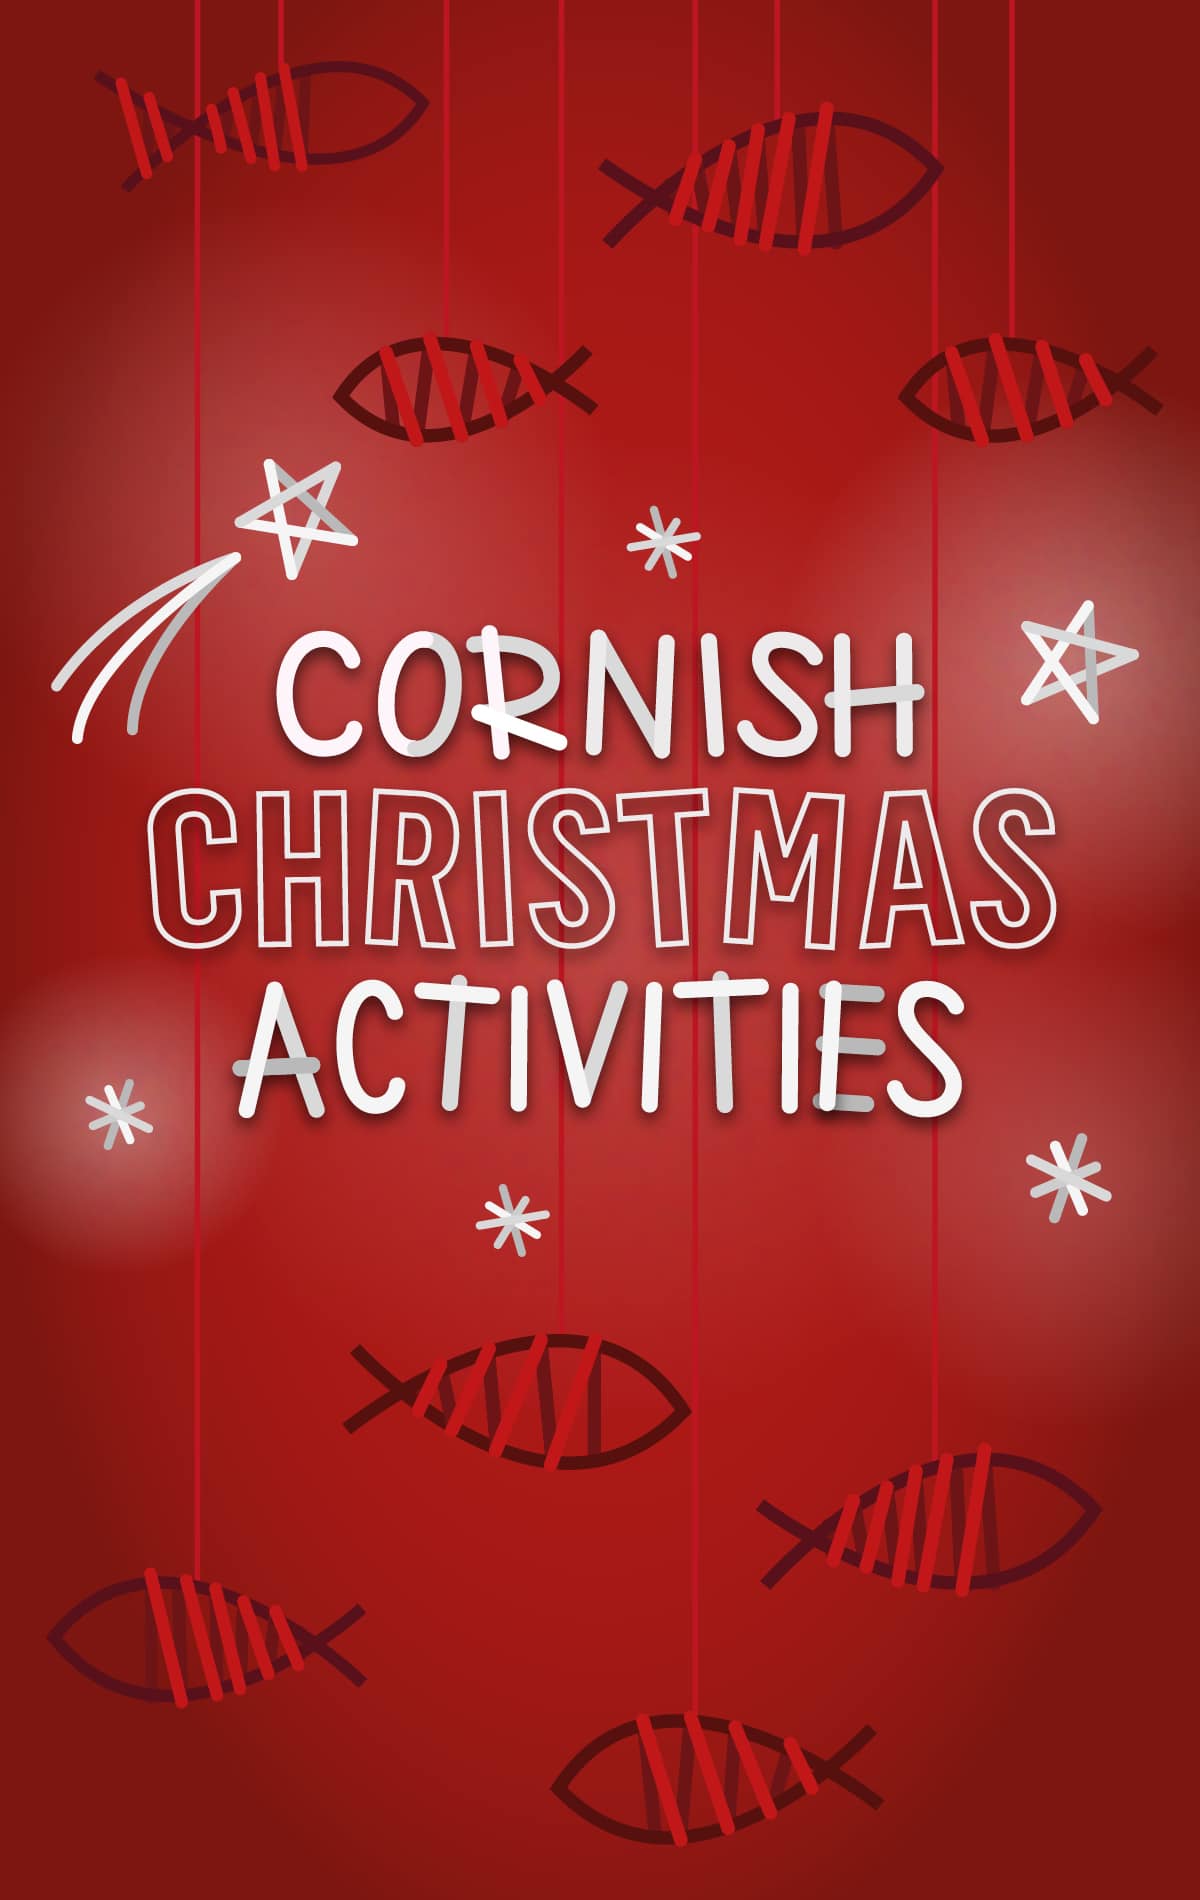 A red and white graphic with the words 'Cornish Christmas Activities'. There are festive illustrations and willow fish tree decorations in the background.